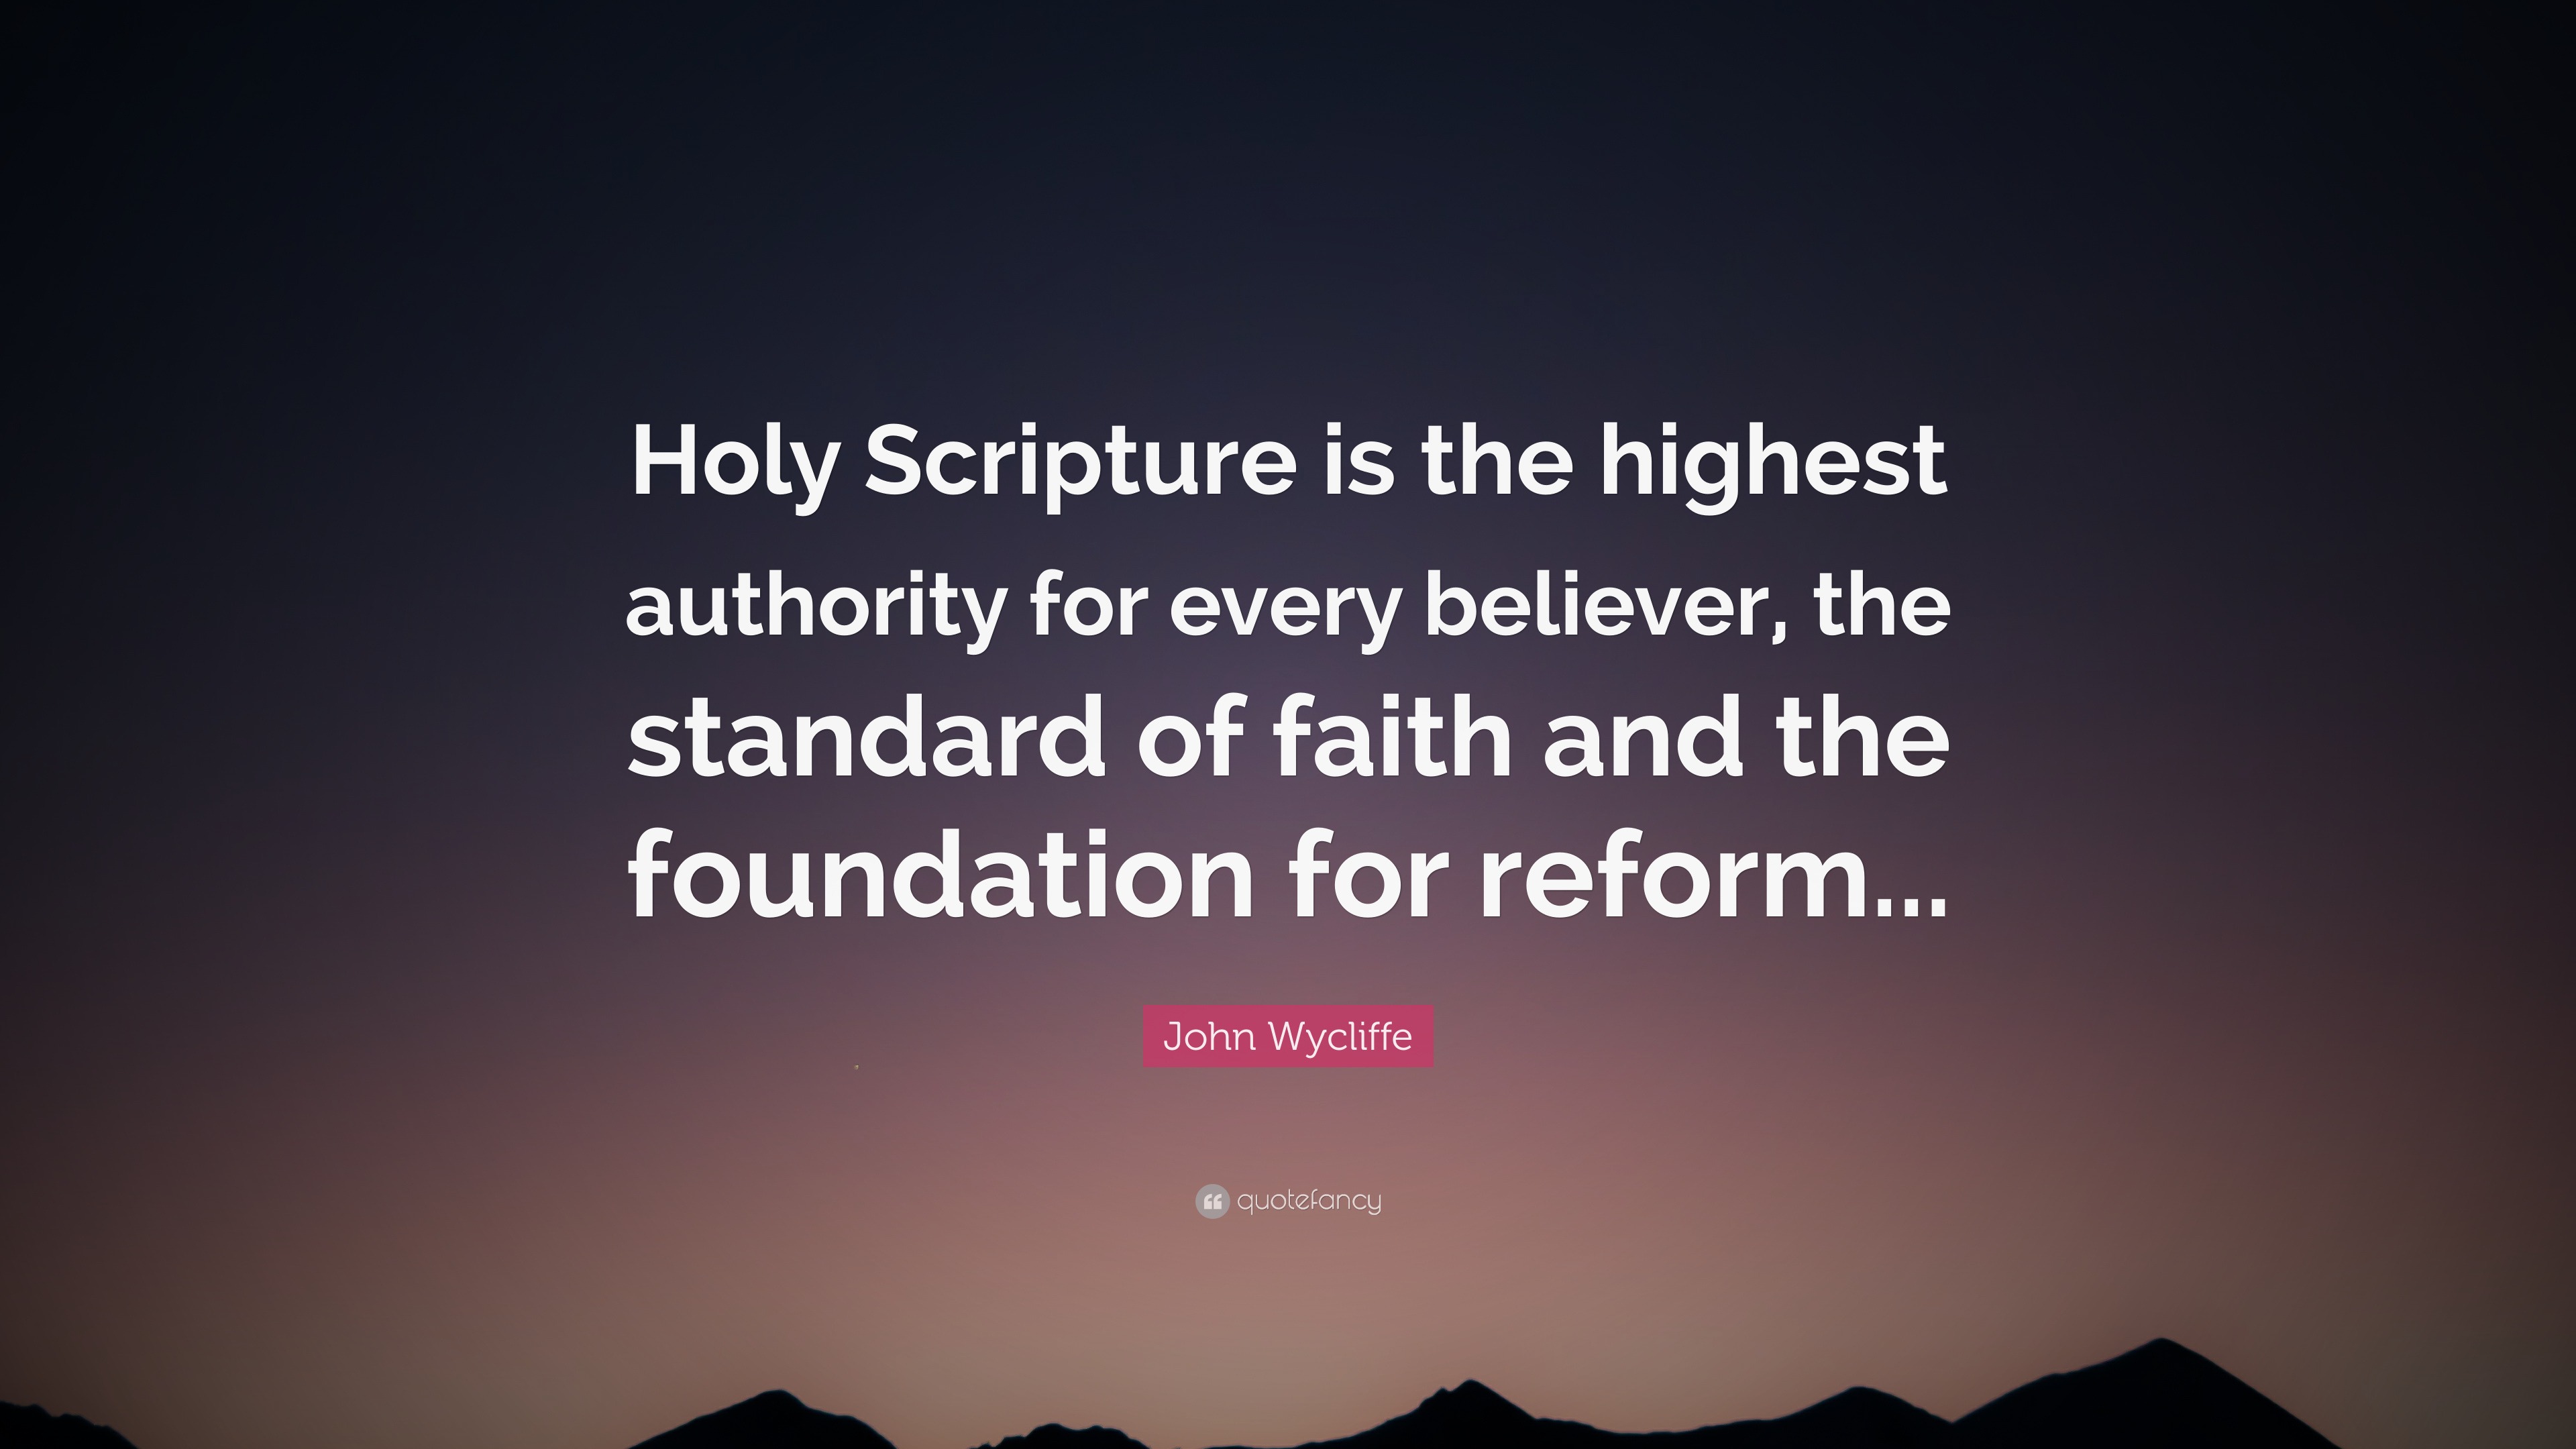 John Wycliffe Quote: “Holy Scripture is the highest authority for every ...